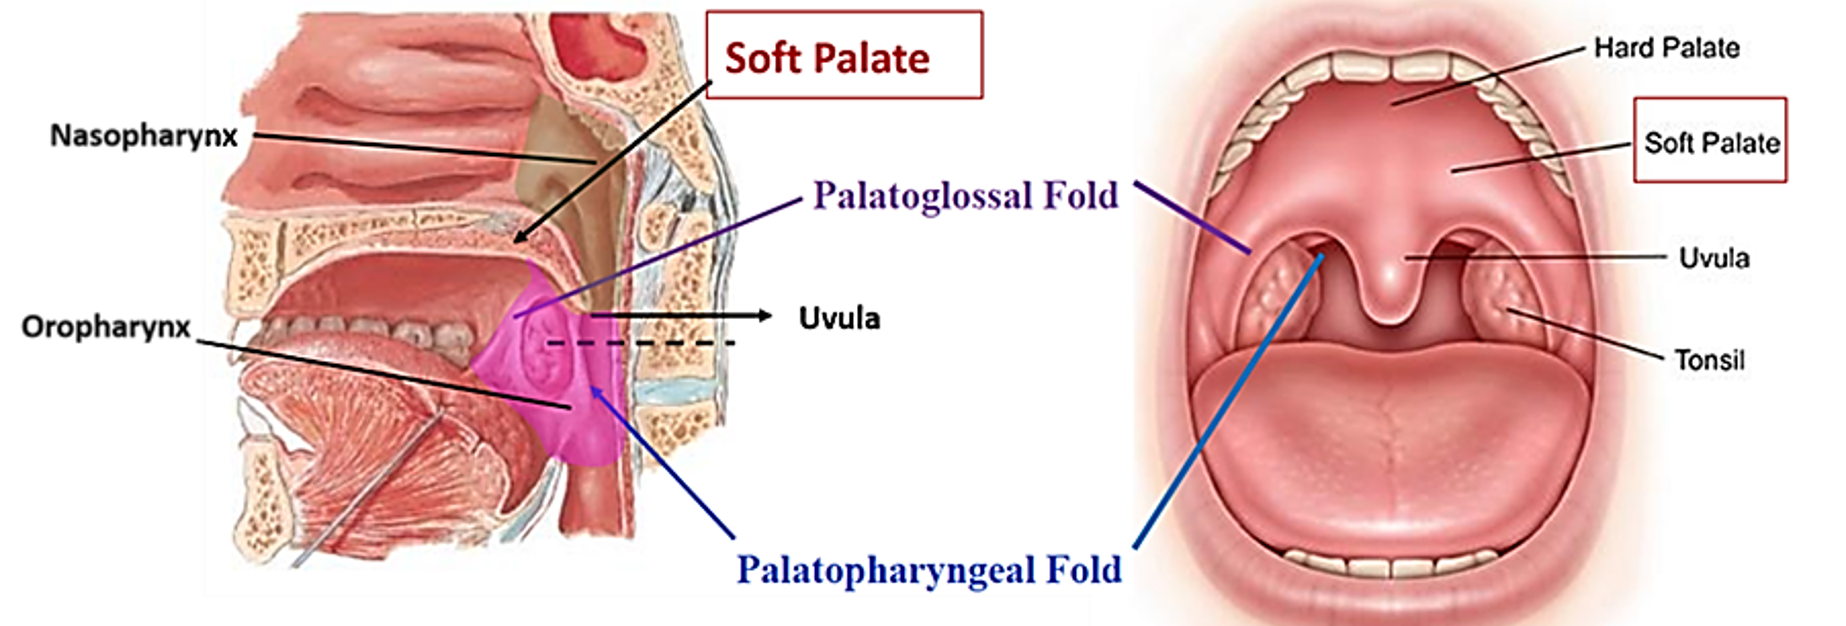  features of soft palat